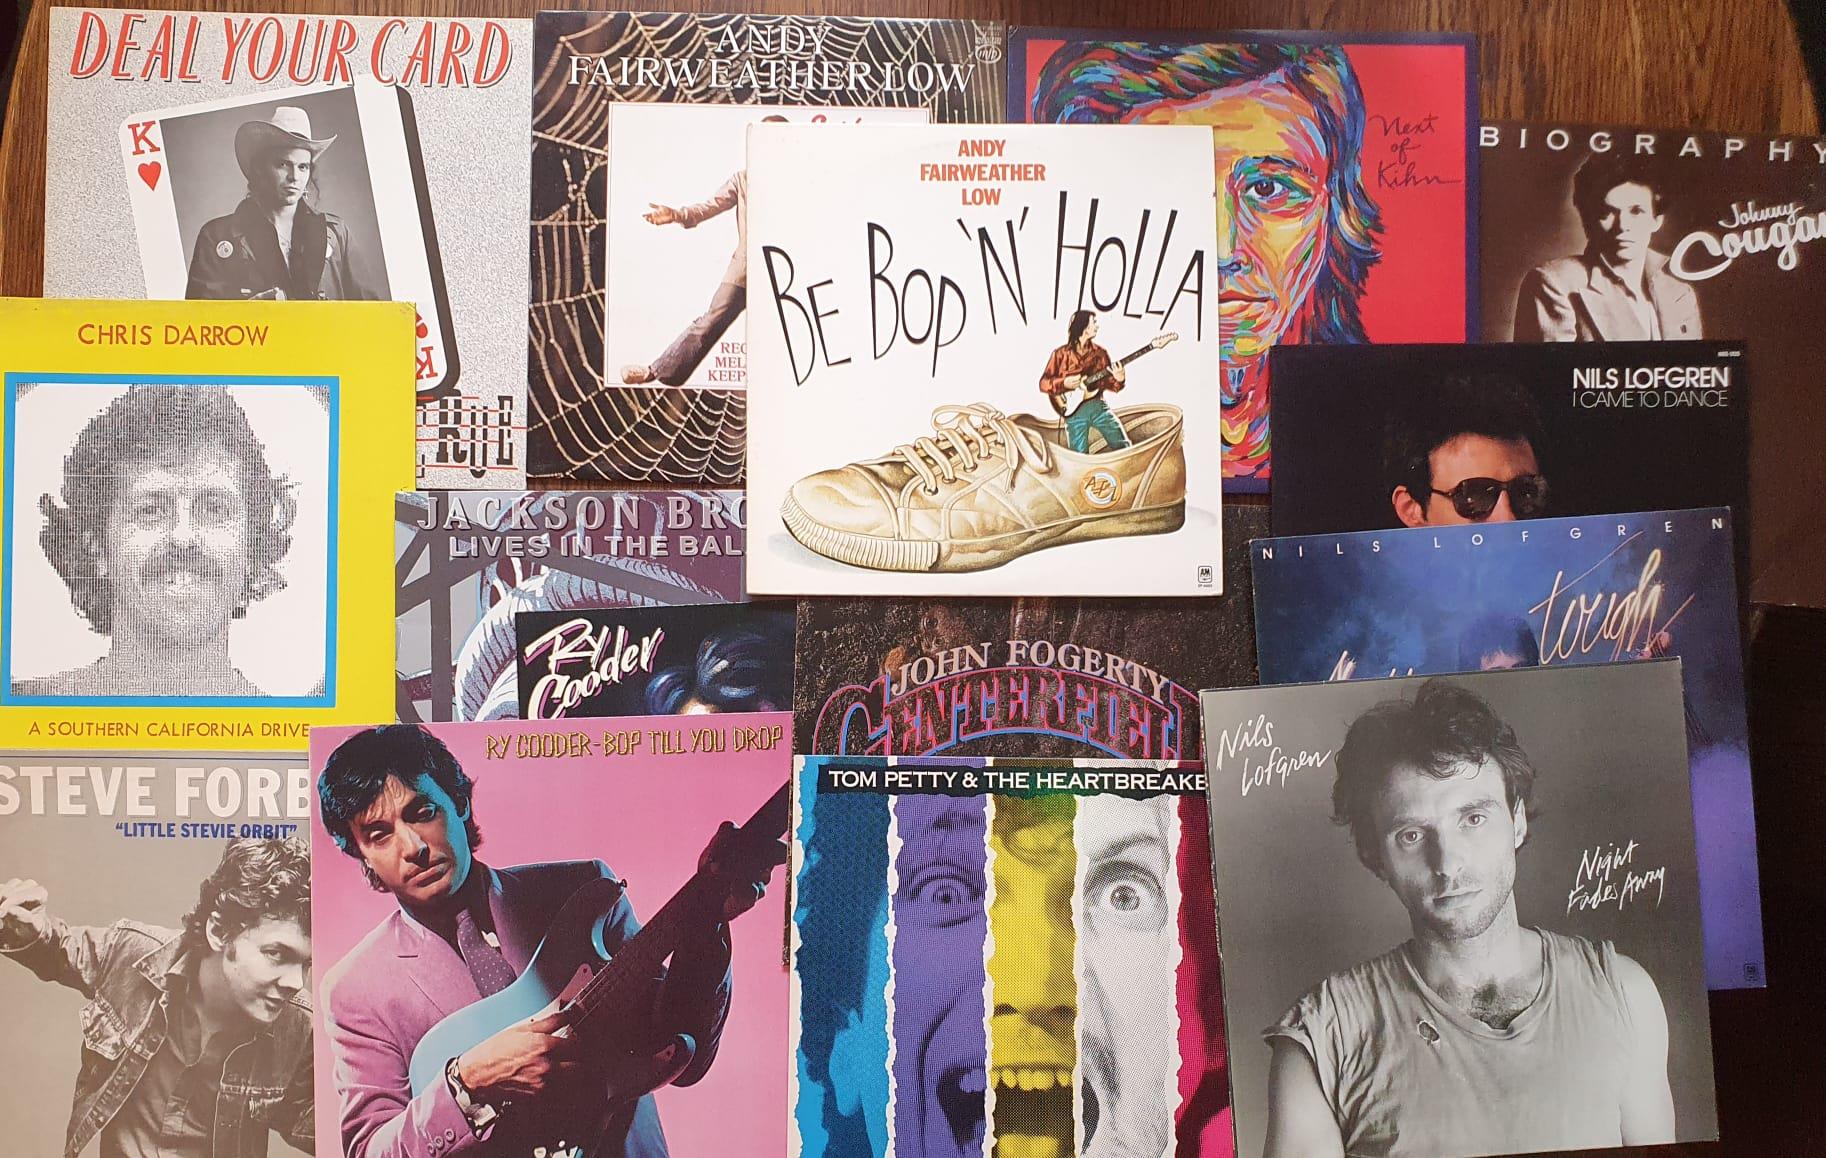 Vinyl LP Record Collection of Fifteen Singer-Songwriter Albums inc Andy Fairweather Low, Ry Cooder,